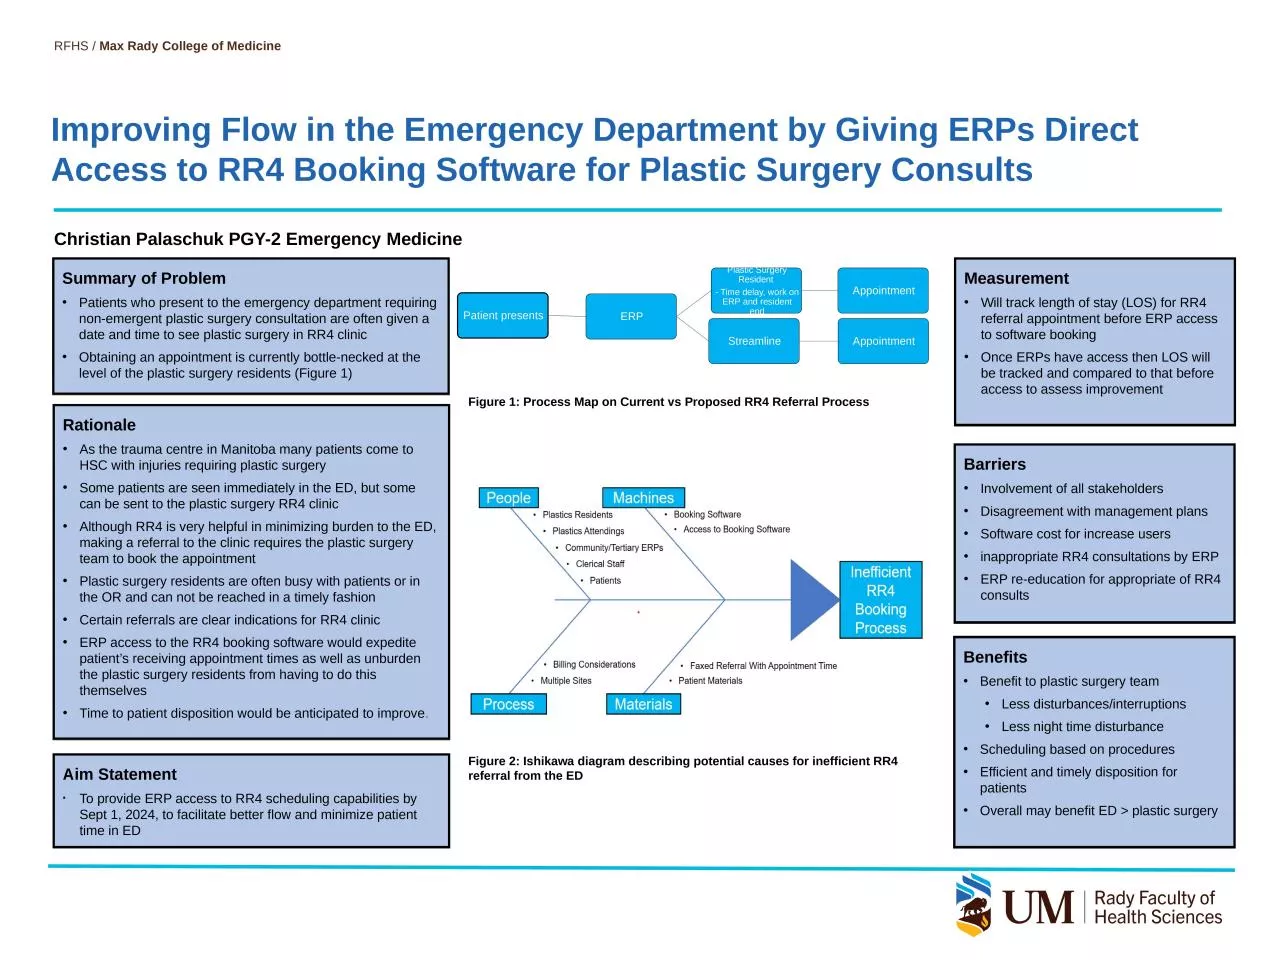 Improving Flow in the Emergency Department by Giving ERPs Direct Access to RR4 Booking